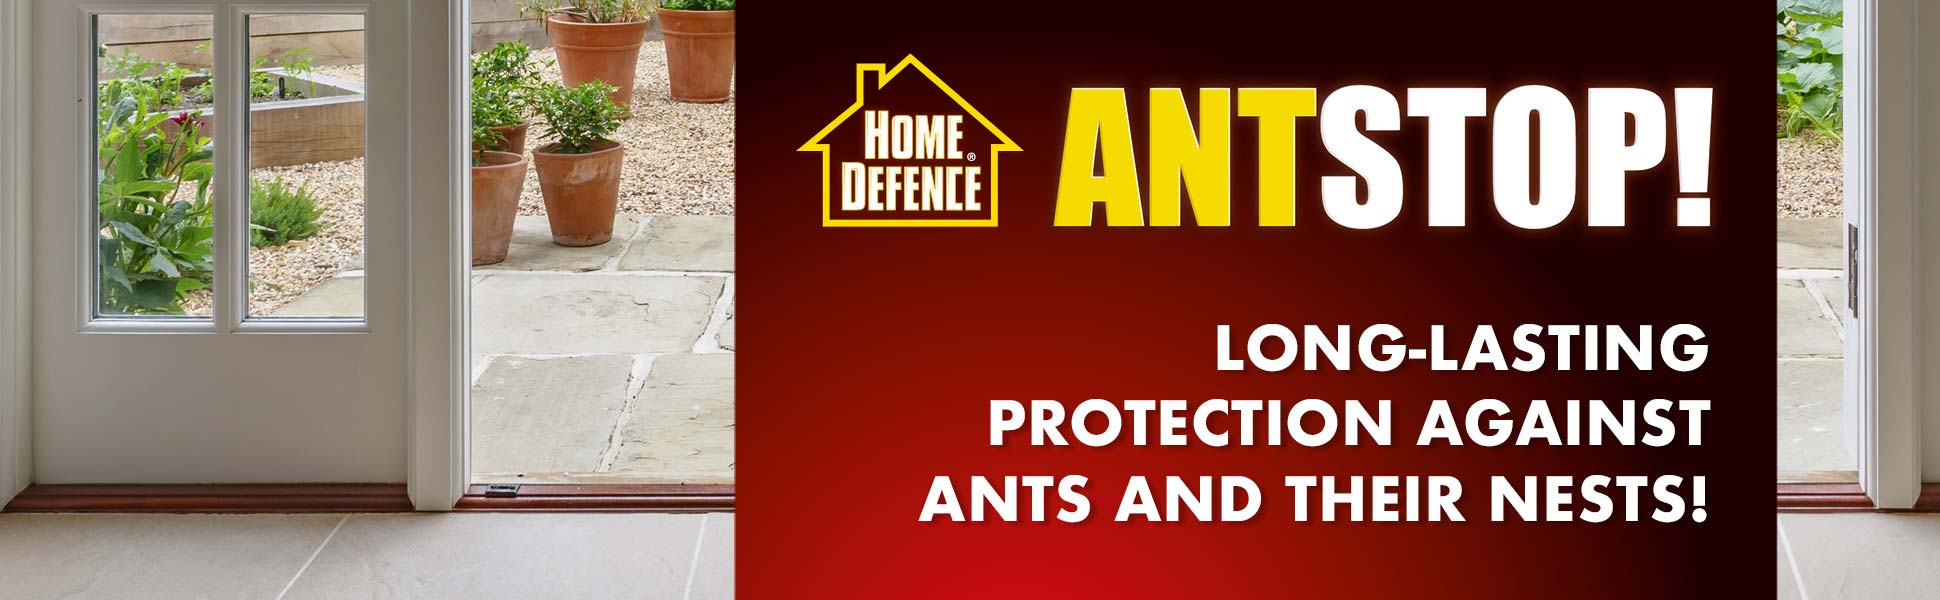 Home Defence® Ant Stop! - Long Lasting Protection Against Ants And Their Nests